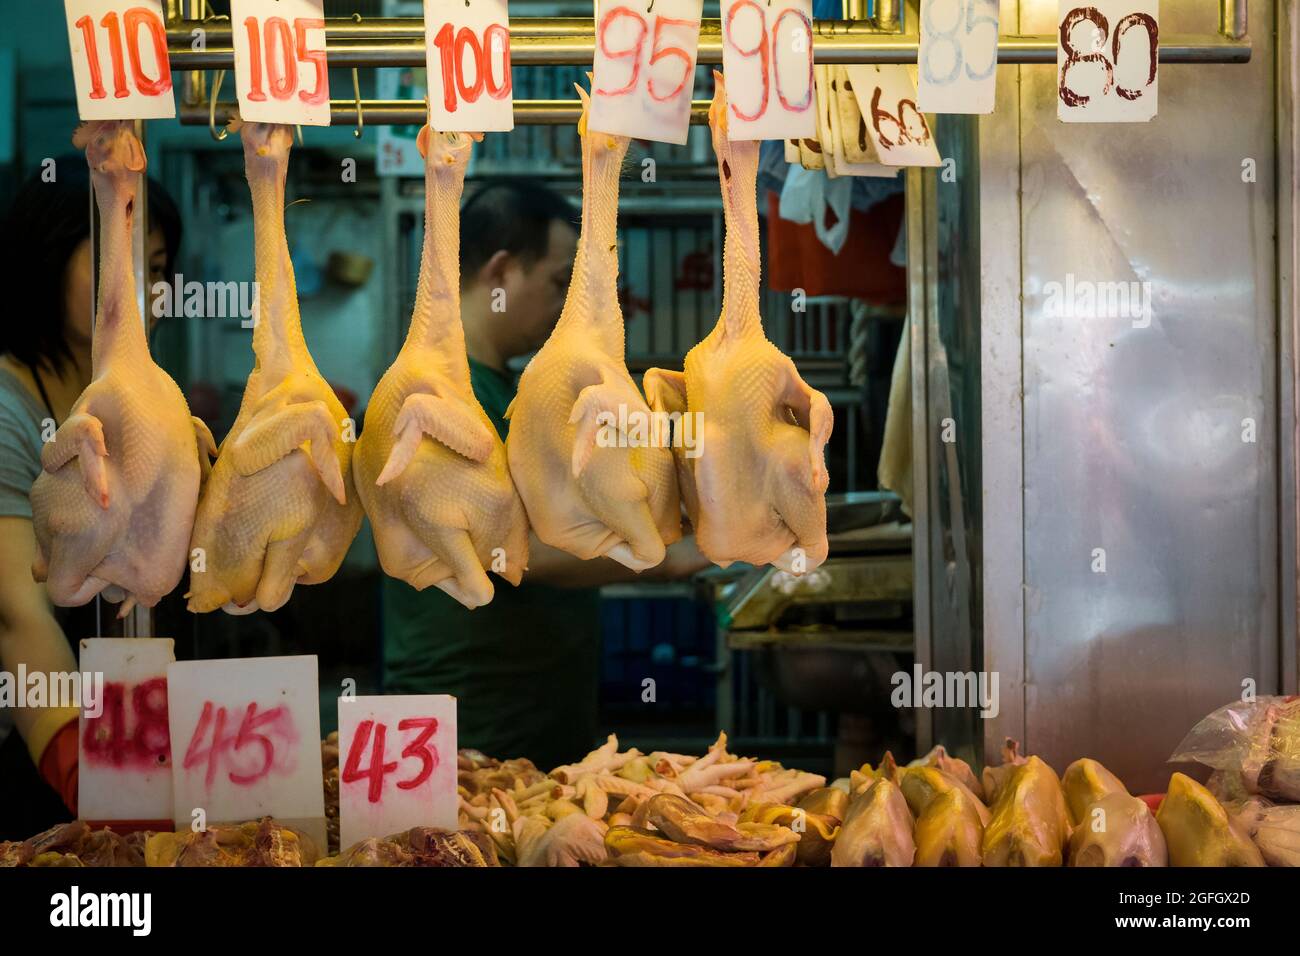 Chickens for sale in a shop in Wan Chai, Hong Kong Island Stock Photo